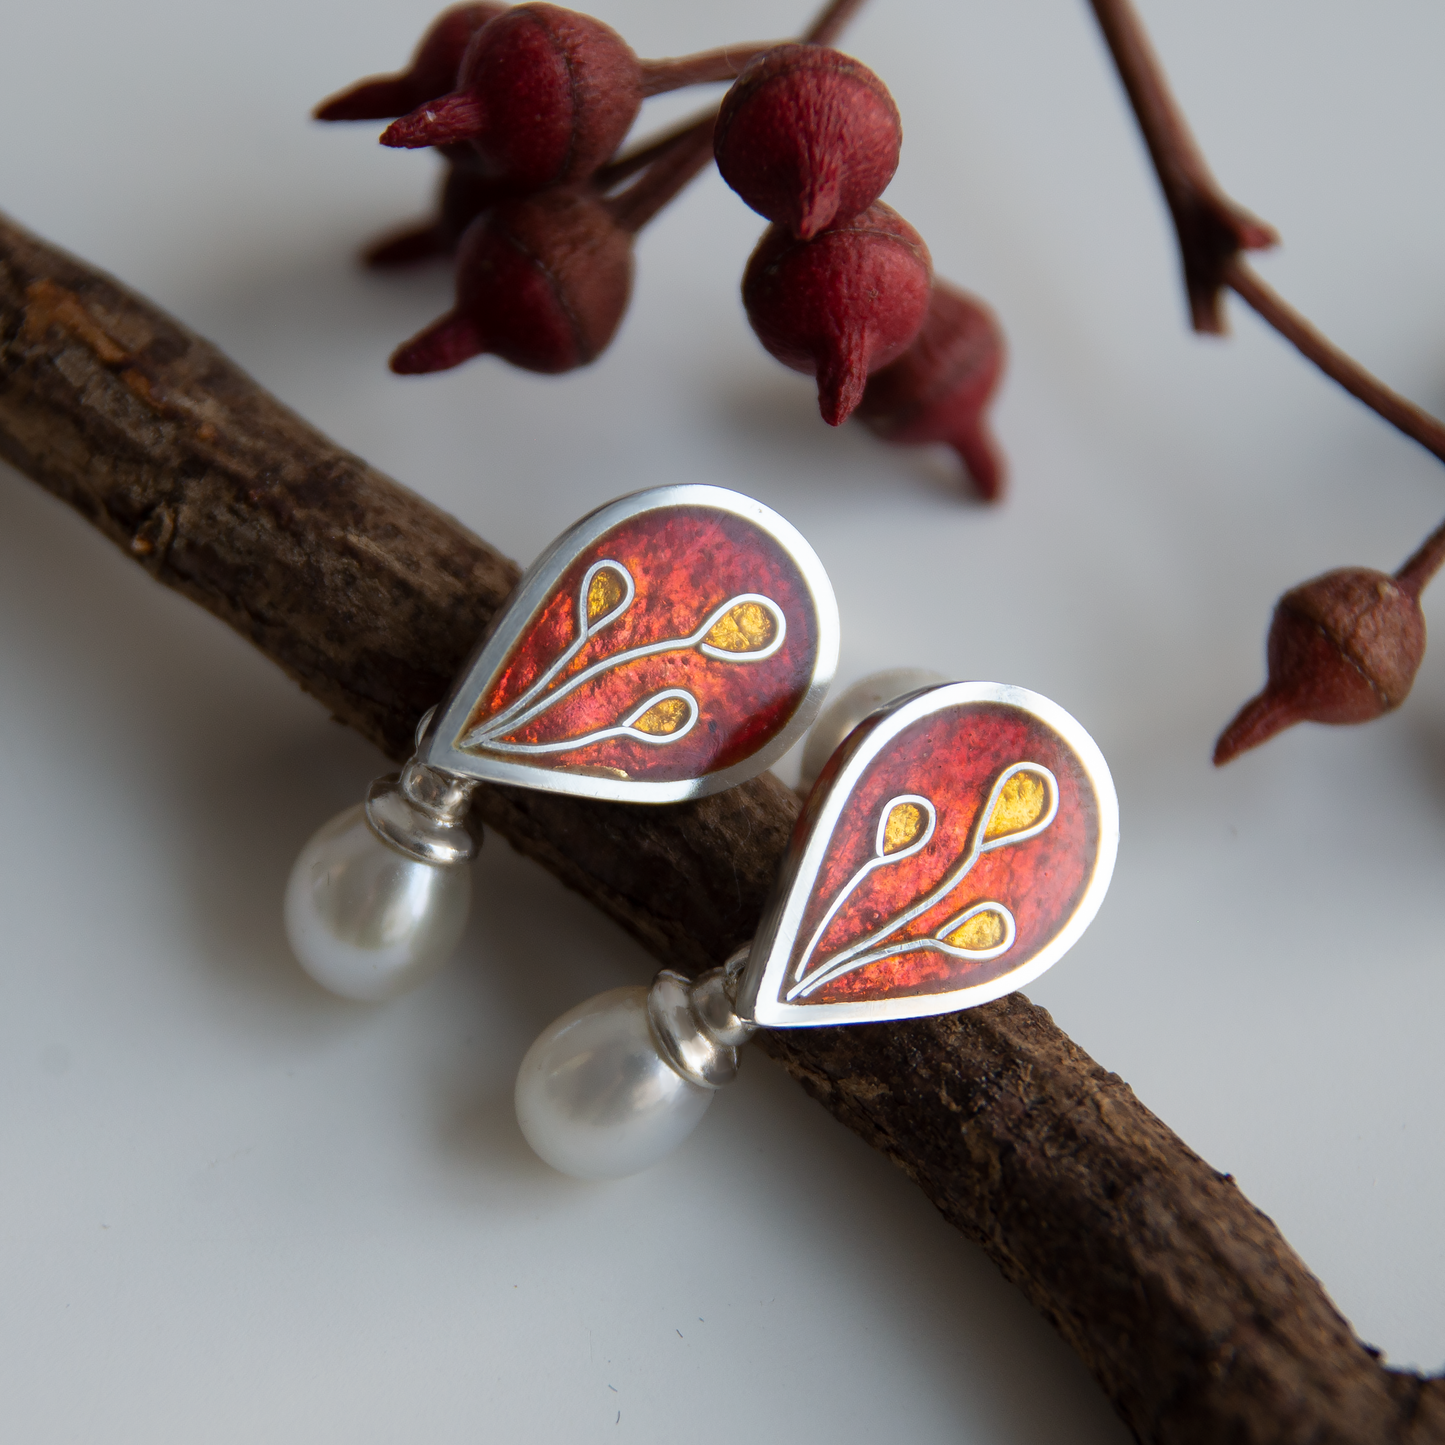 Red Cloisonné Enamel Drops With White Pearls